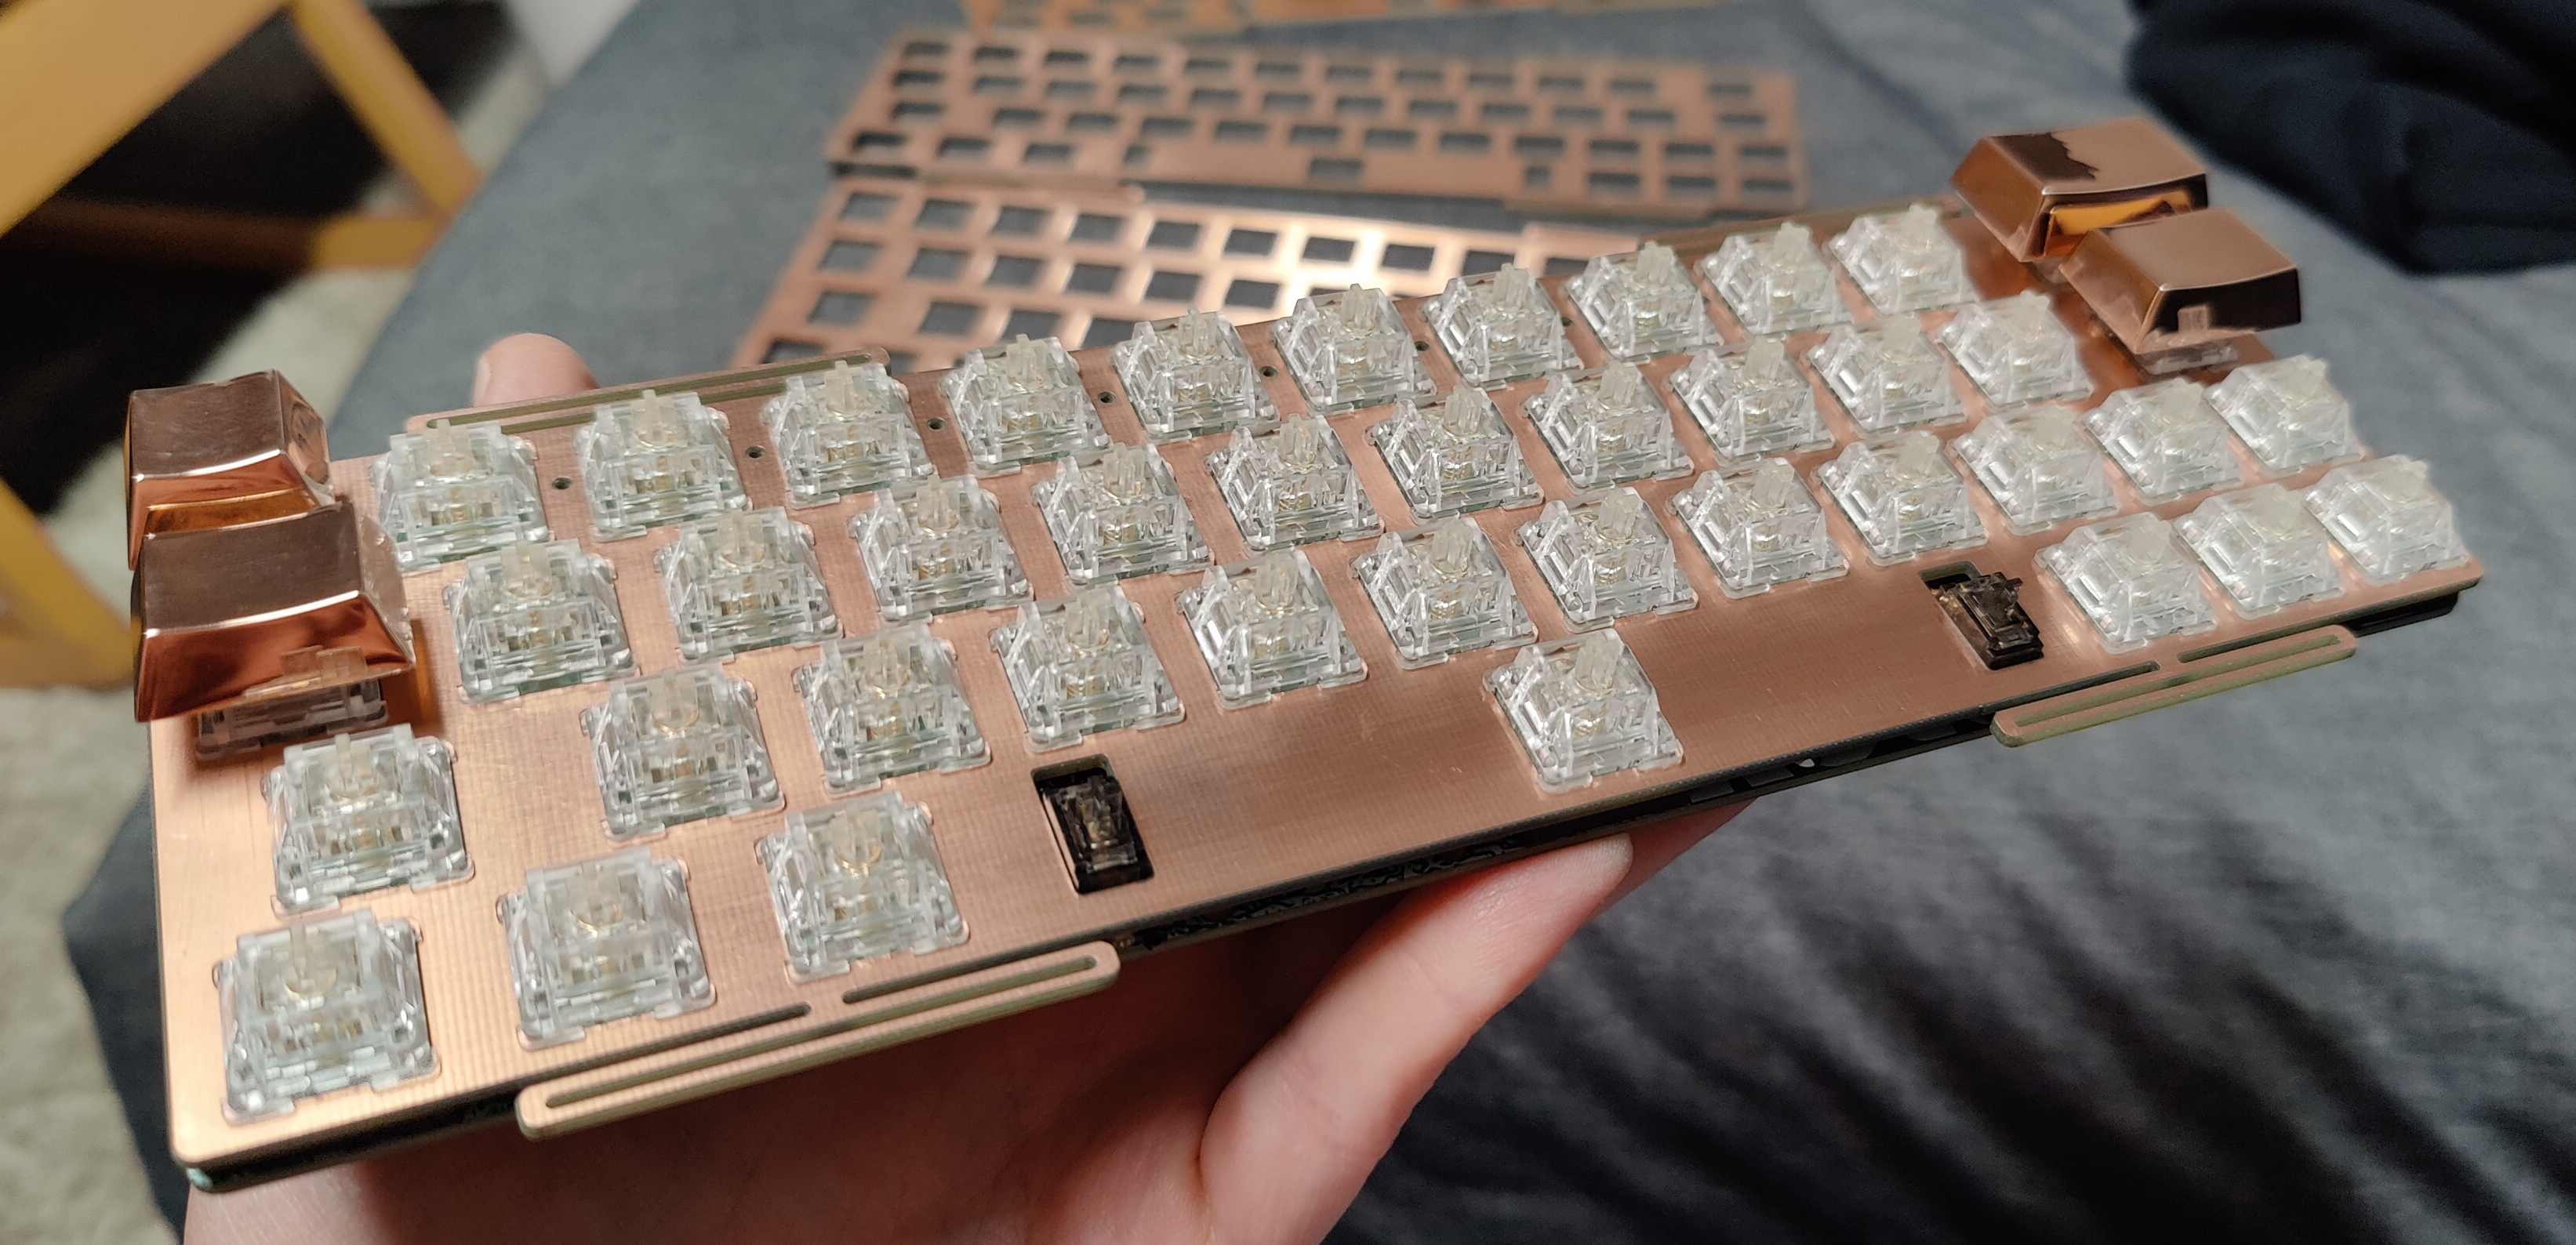 FR4 leafspring plate for Carpool with exposed copper fill and custom copper keycaps